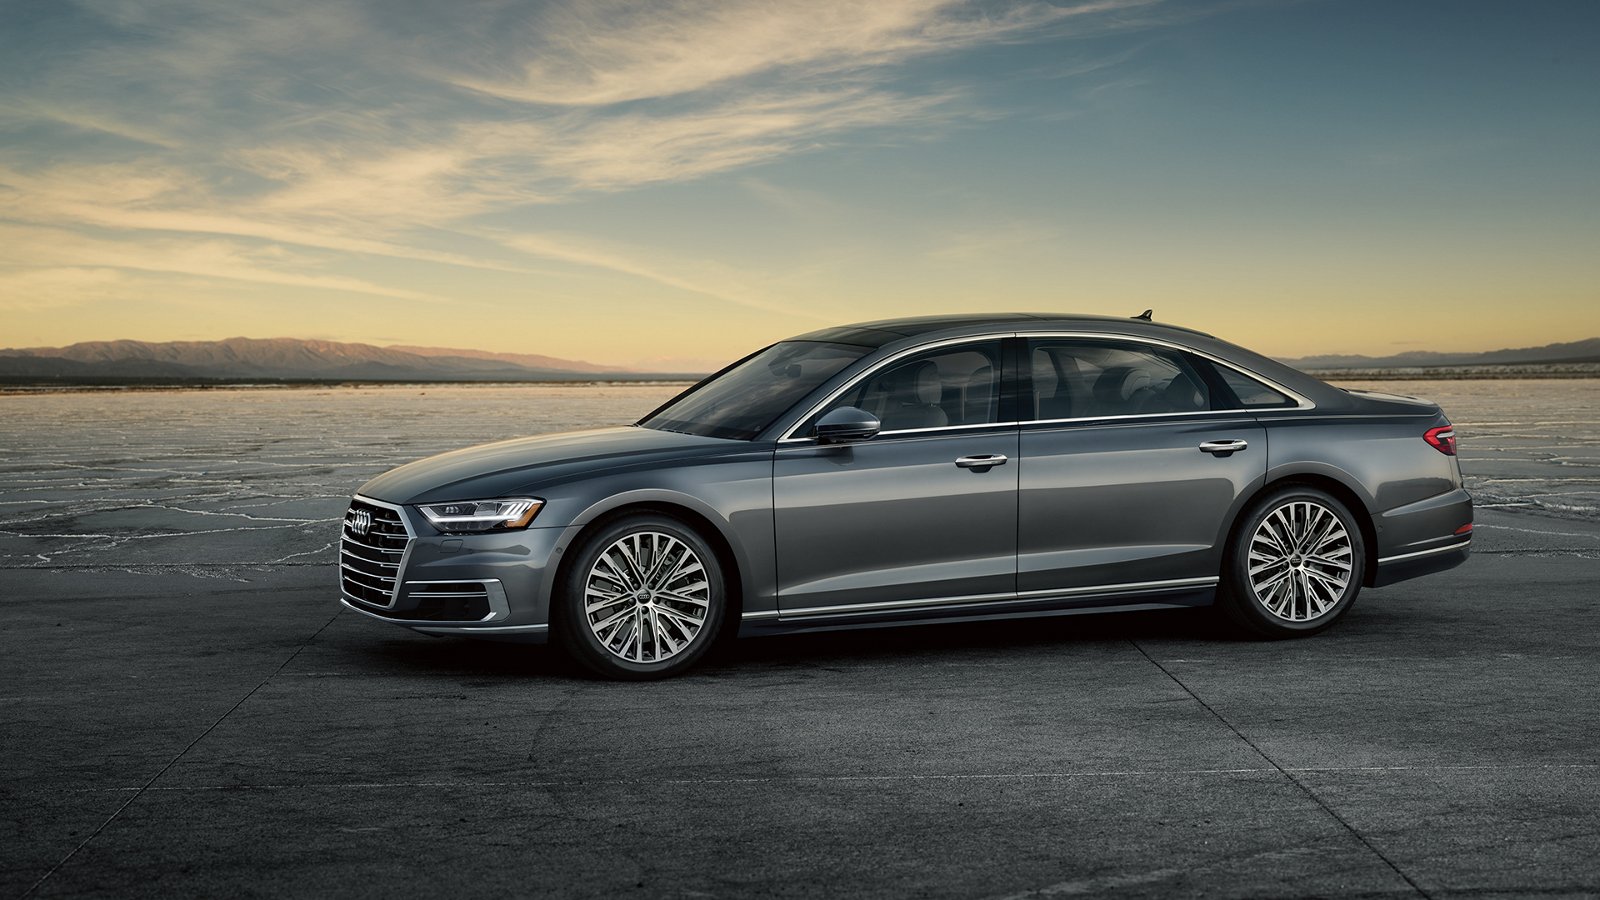 Read This Before Buying Used Audi A8